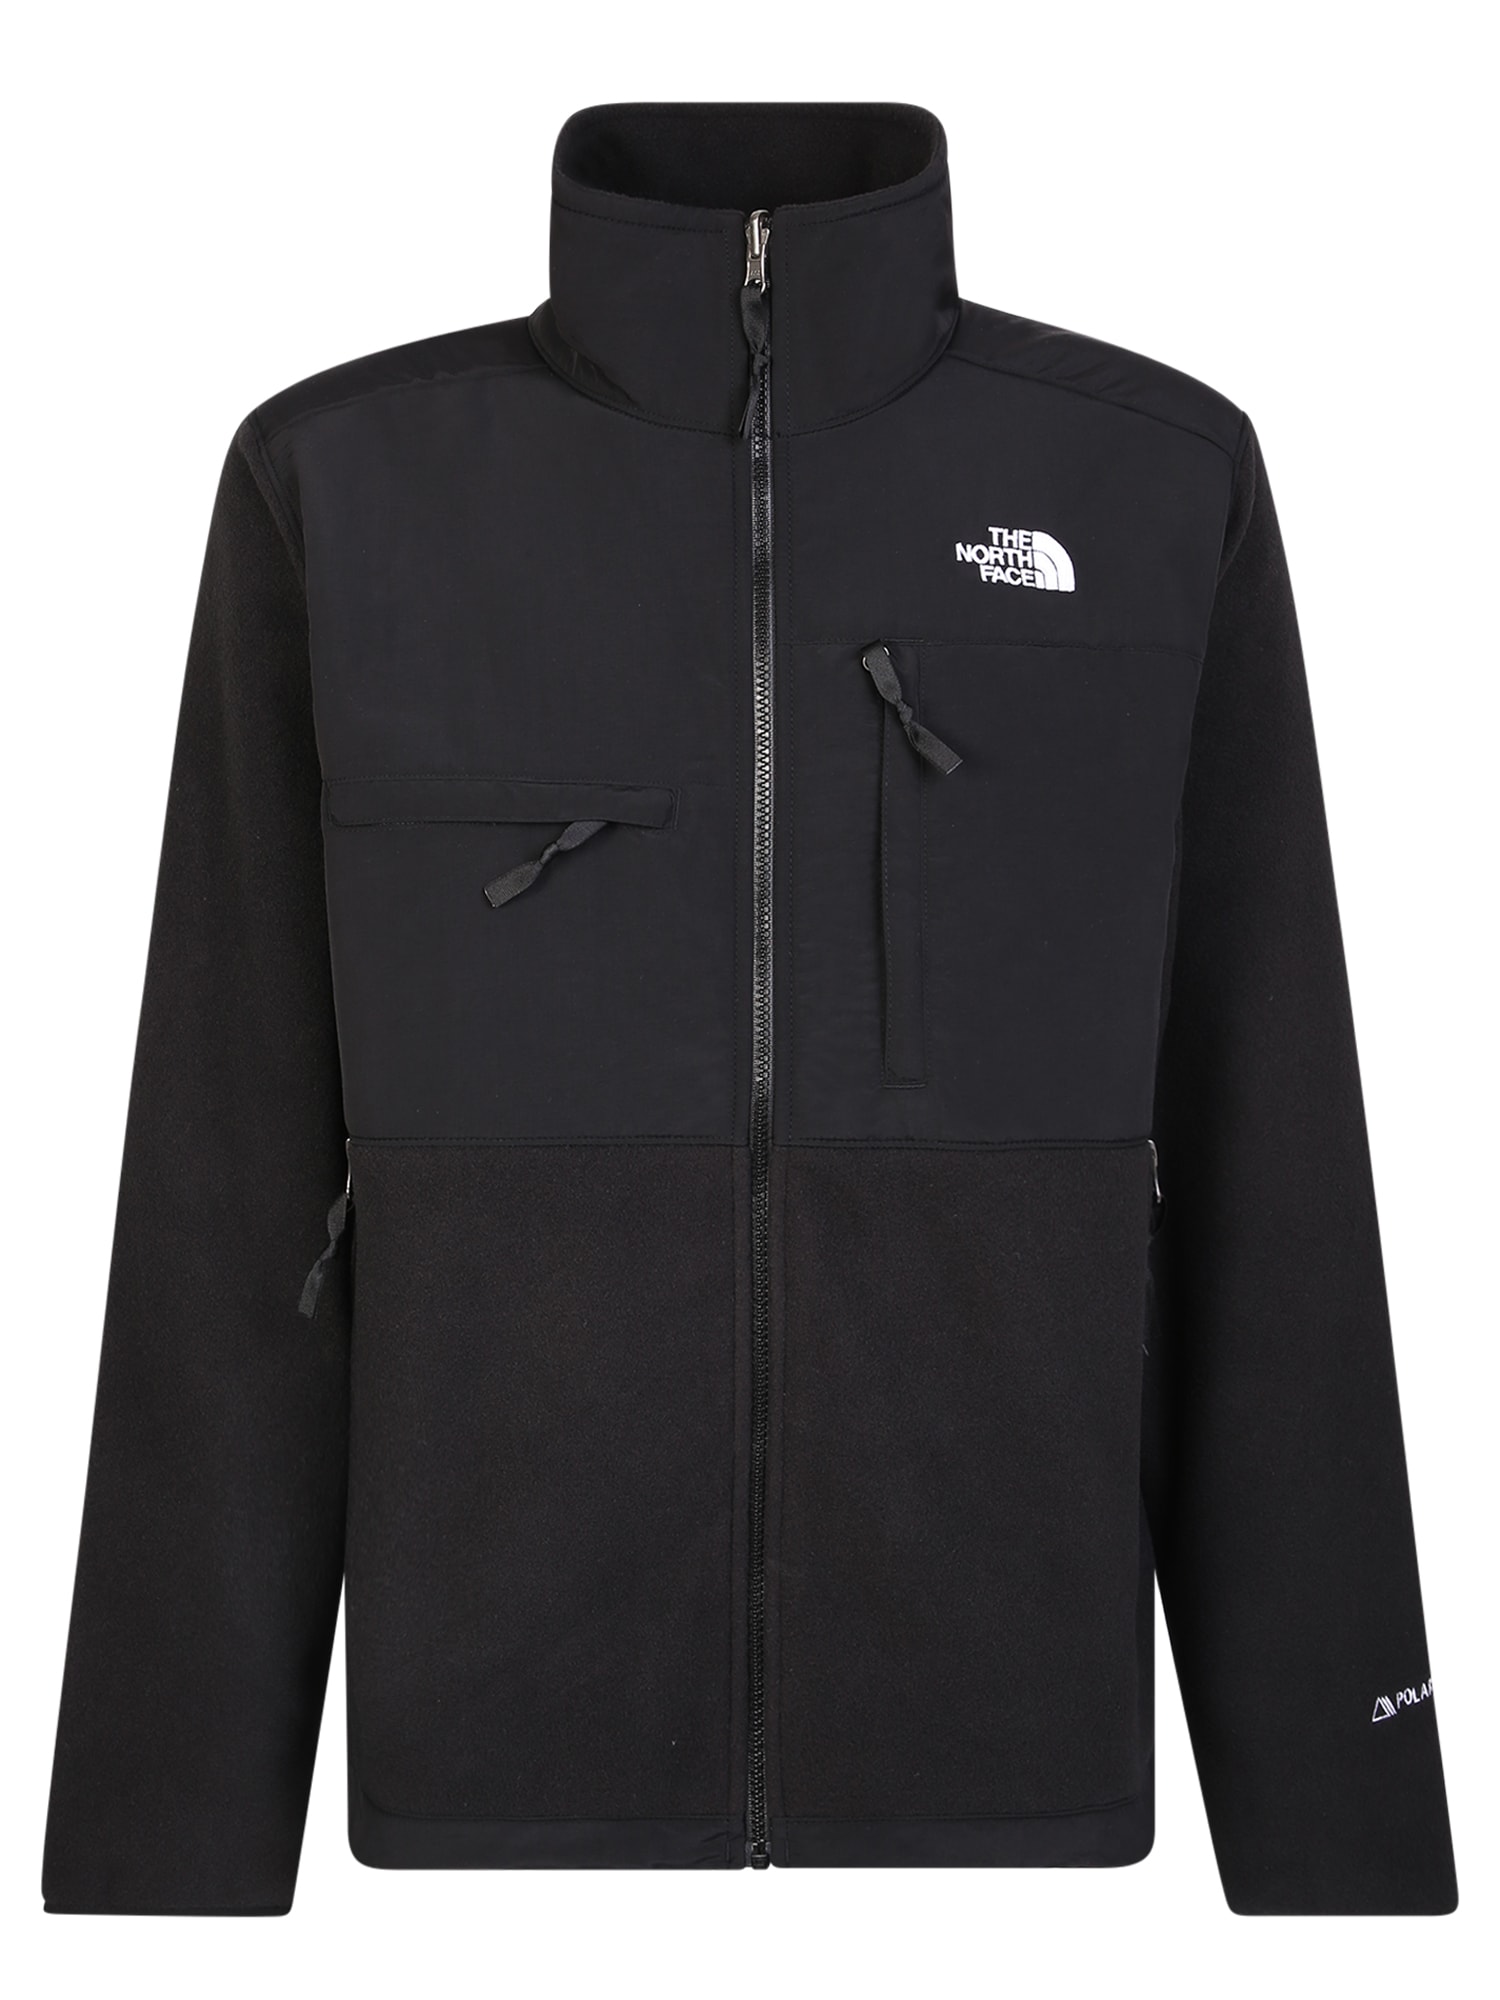 The North Face Fleece Jacket With Iconic Logo Black